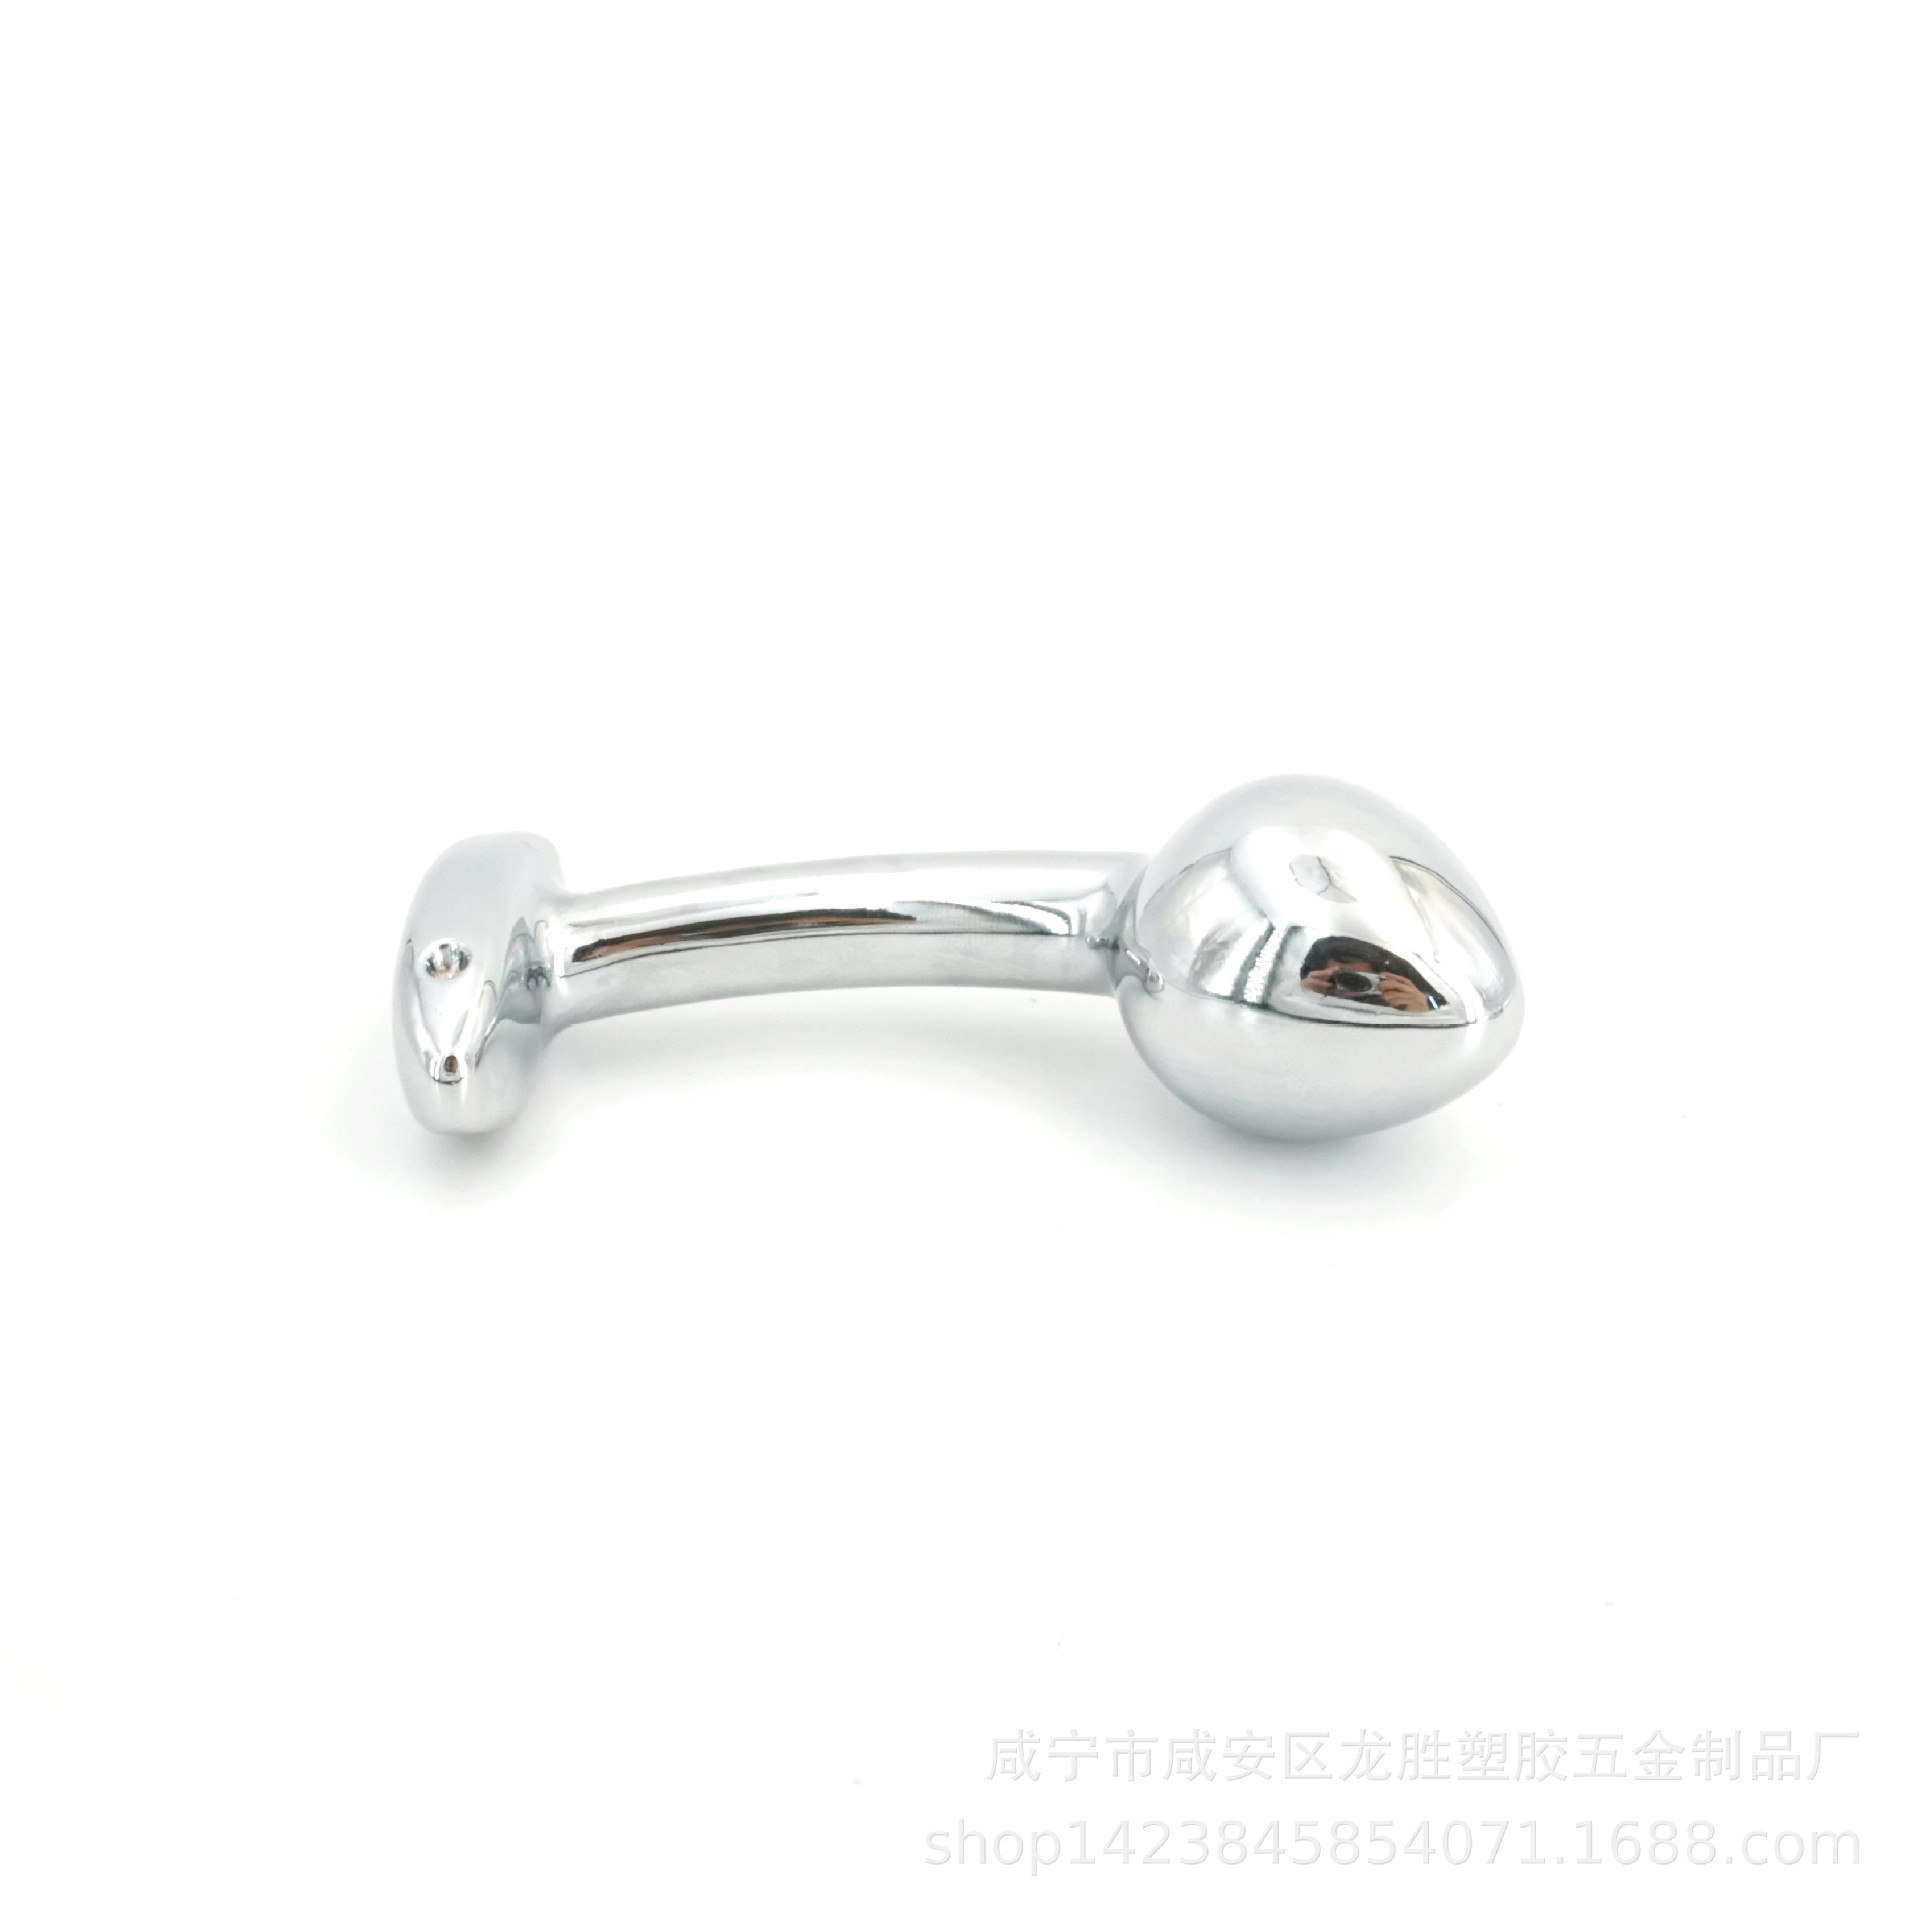 Buttplug Silver Large